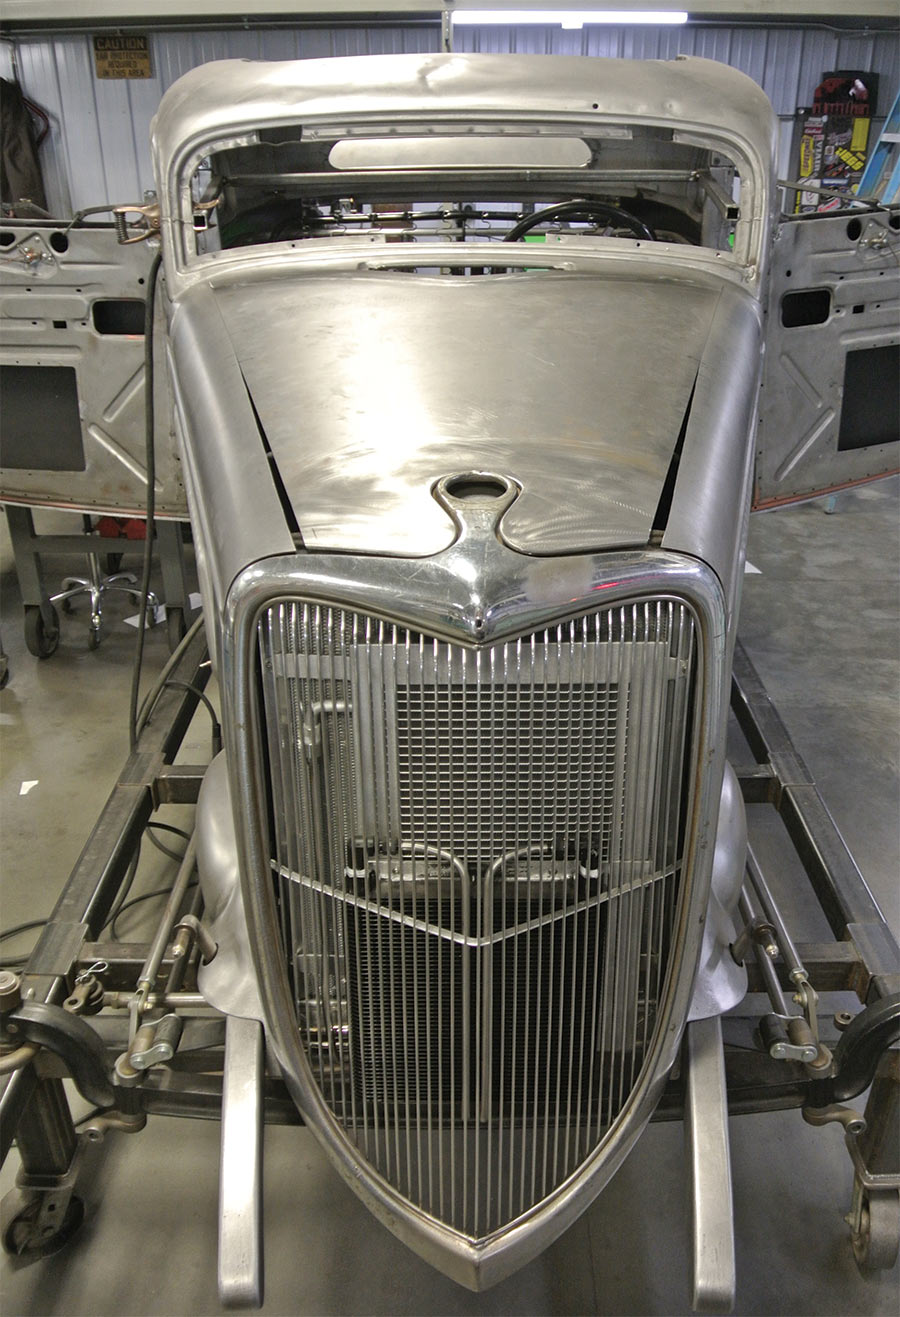 both outer panels fitted to the car and the centerskin of the hood